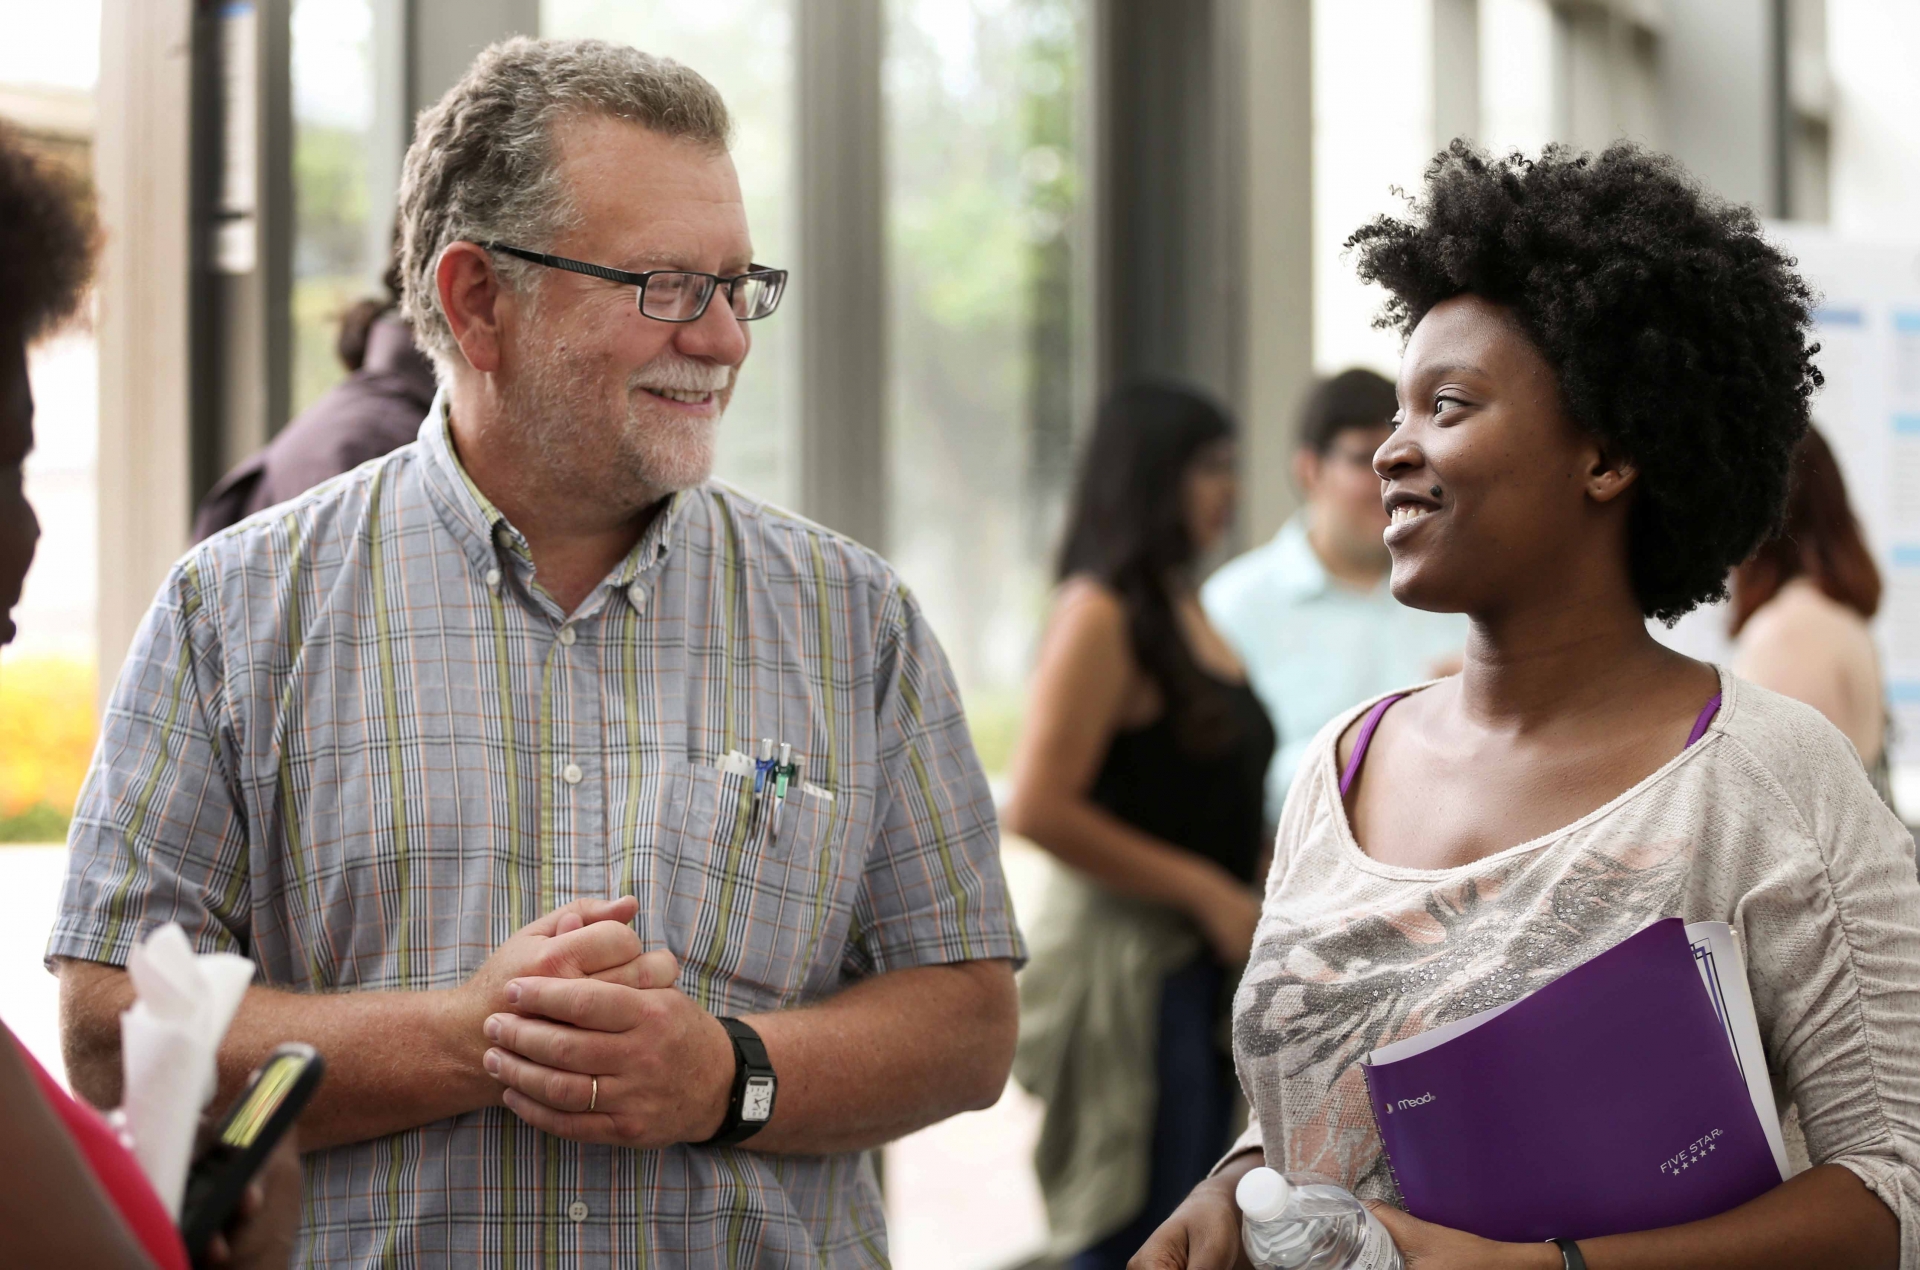 Tim Usher (l), professor of physics, and Kayla Black, student, at the Center for Advanced Functional Materials Summer Research Open House and CREST Open House in July 2015. Usher will serve as the principal investigator for the National Science Foundation’s International Research Experiences for Students grant at CSUSB.